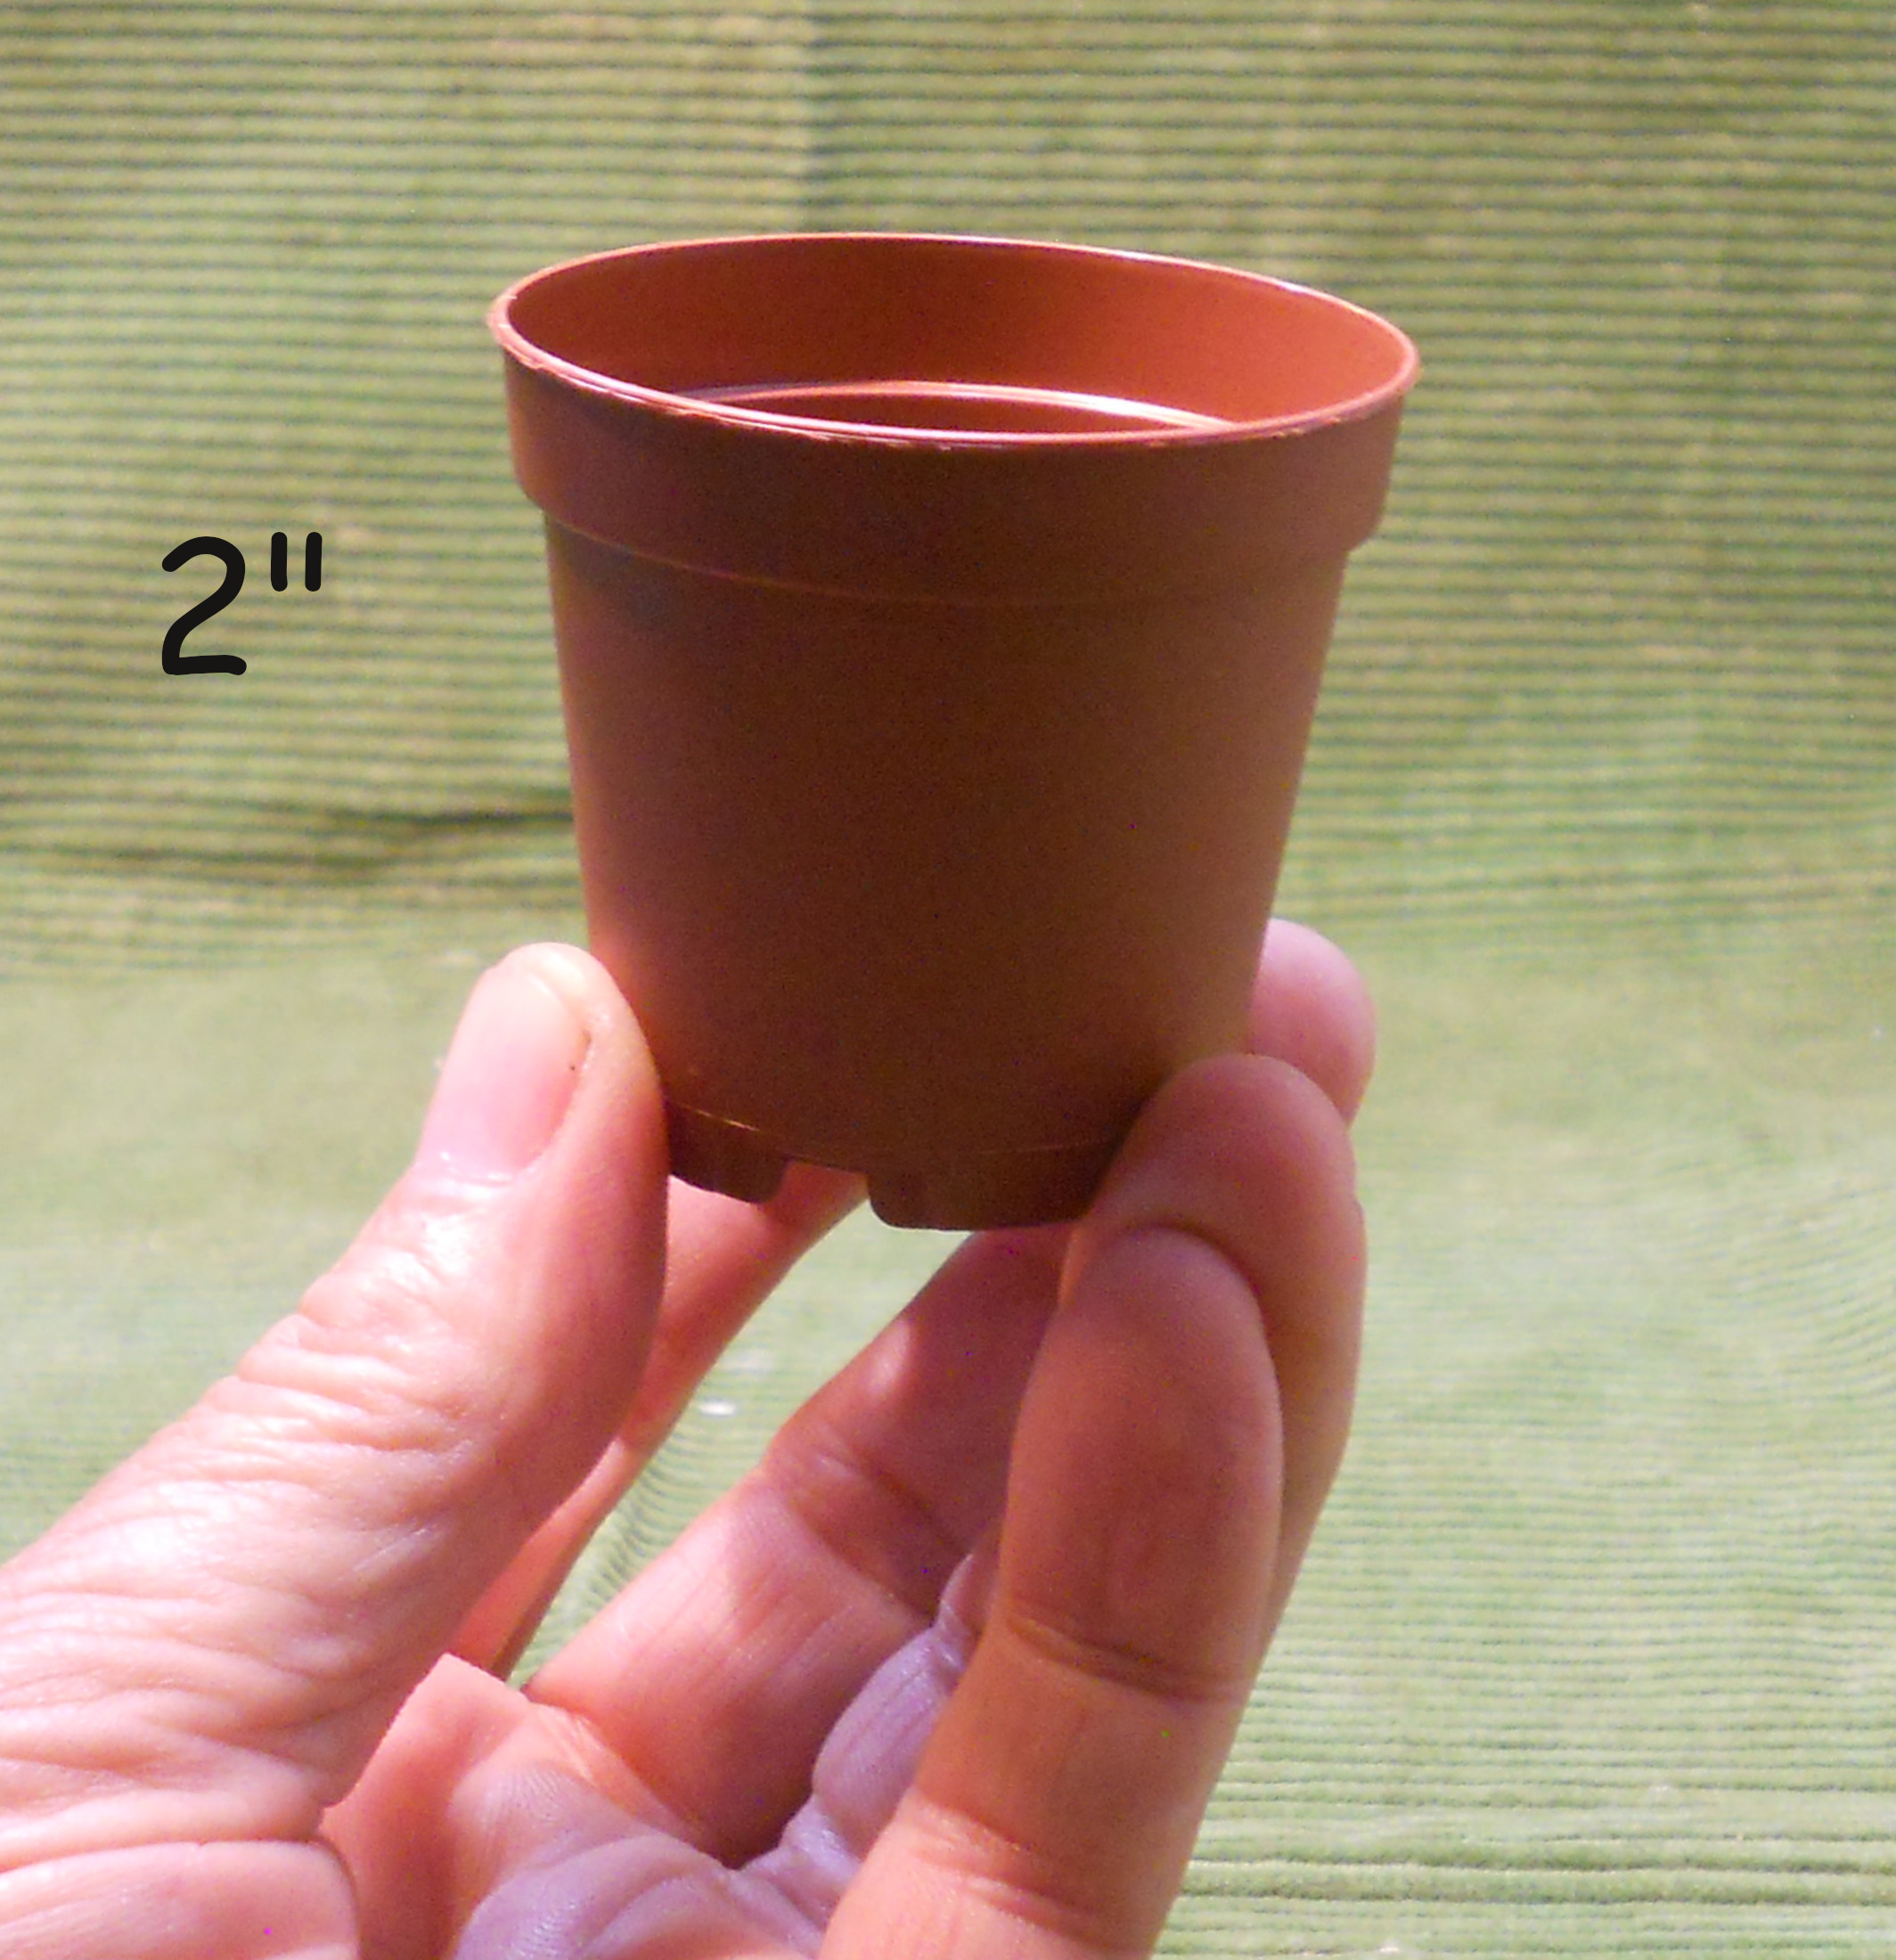 2 inch brow pot in hand